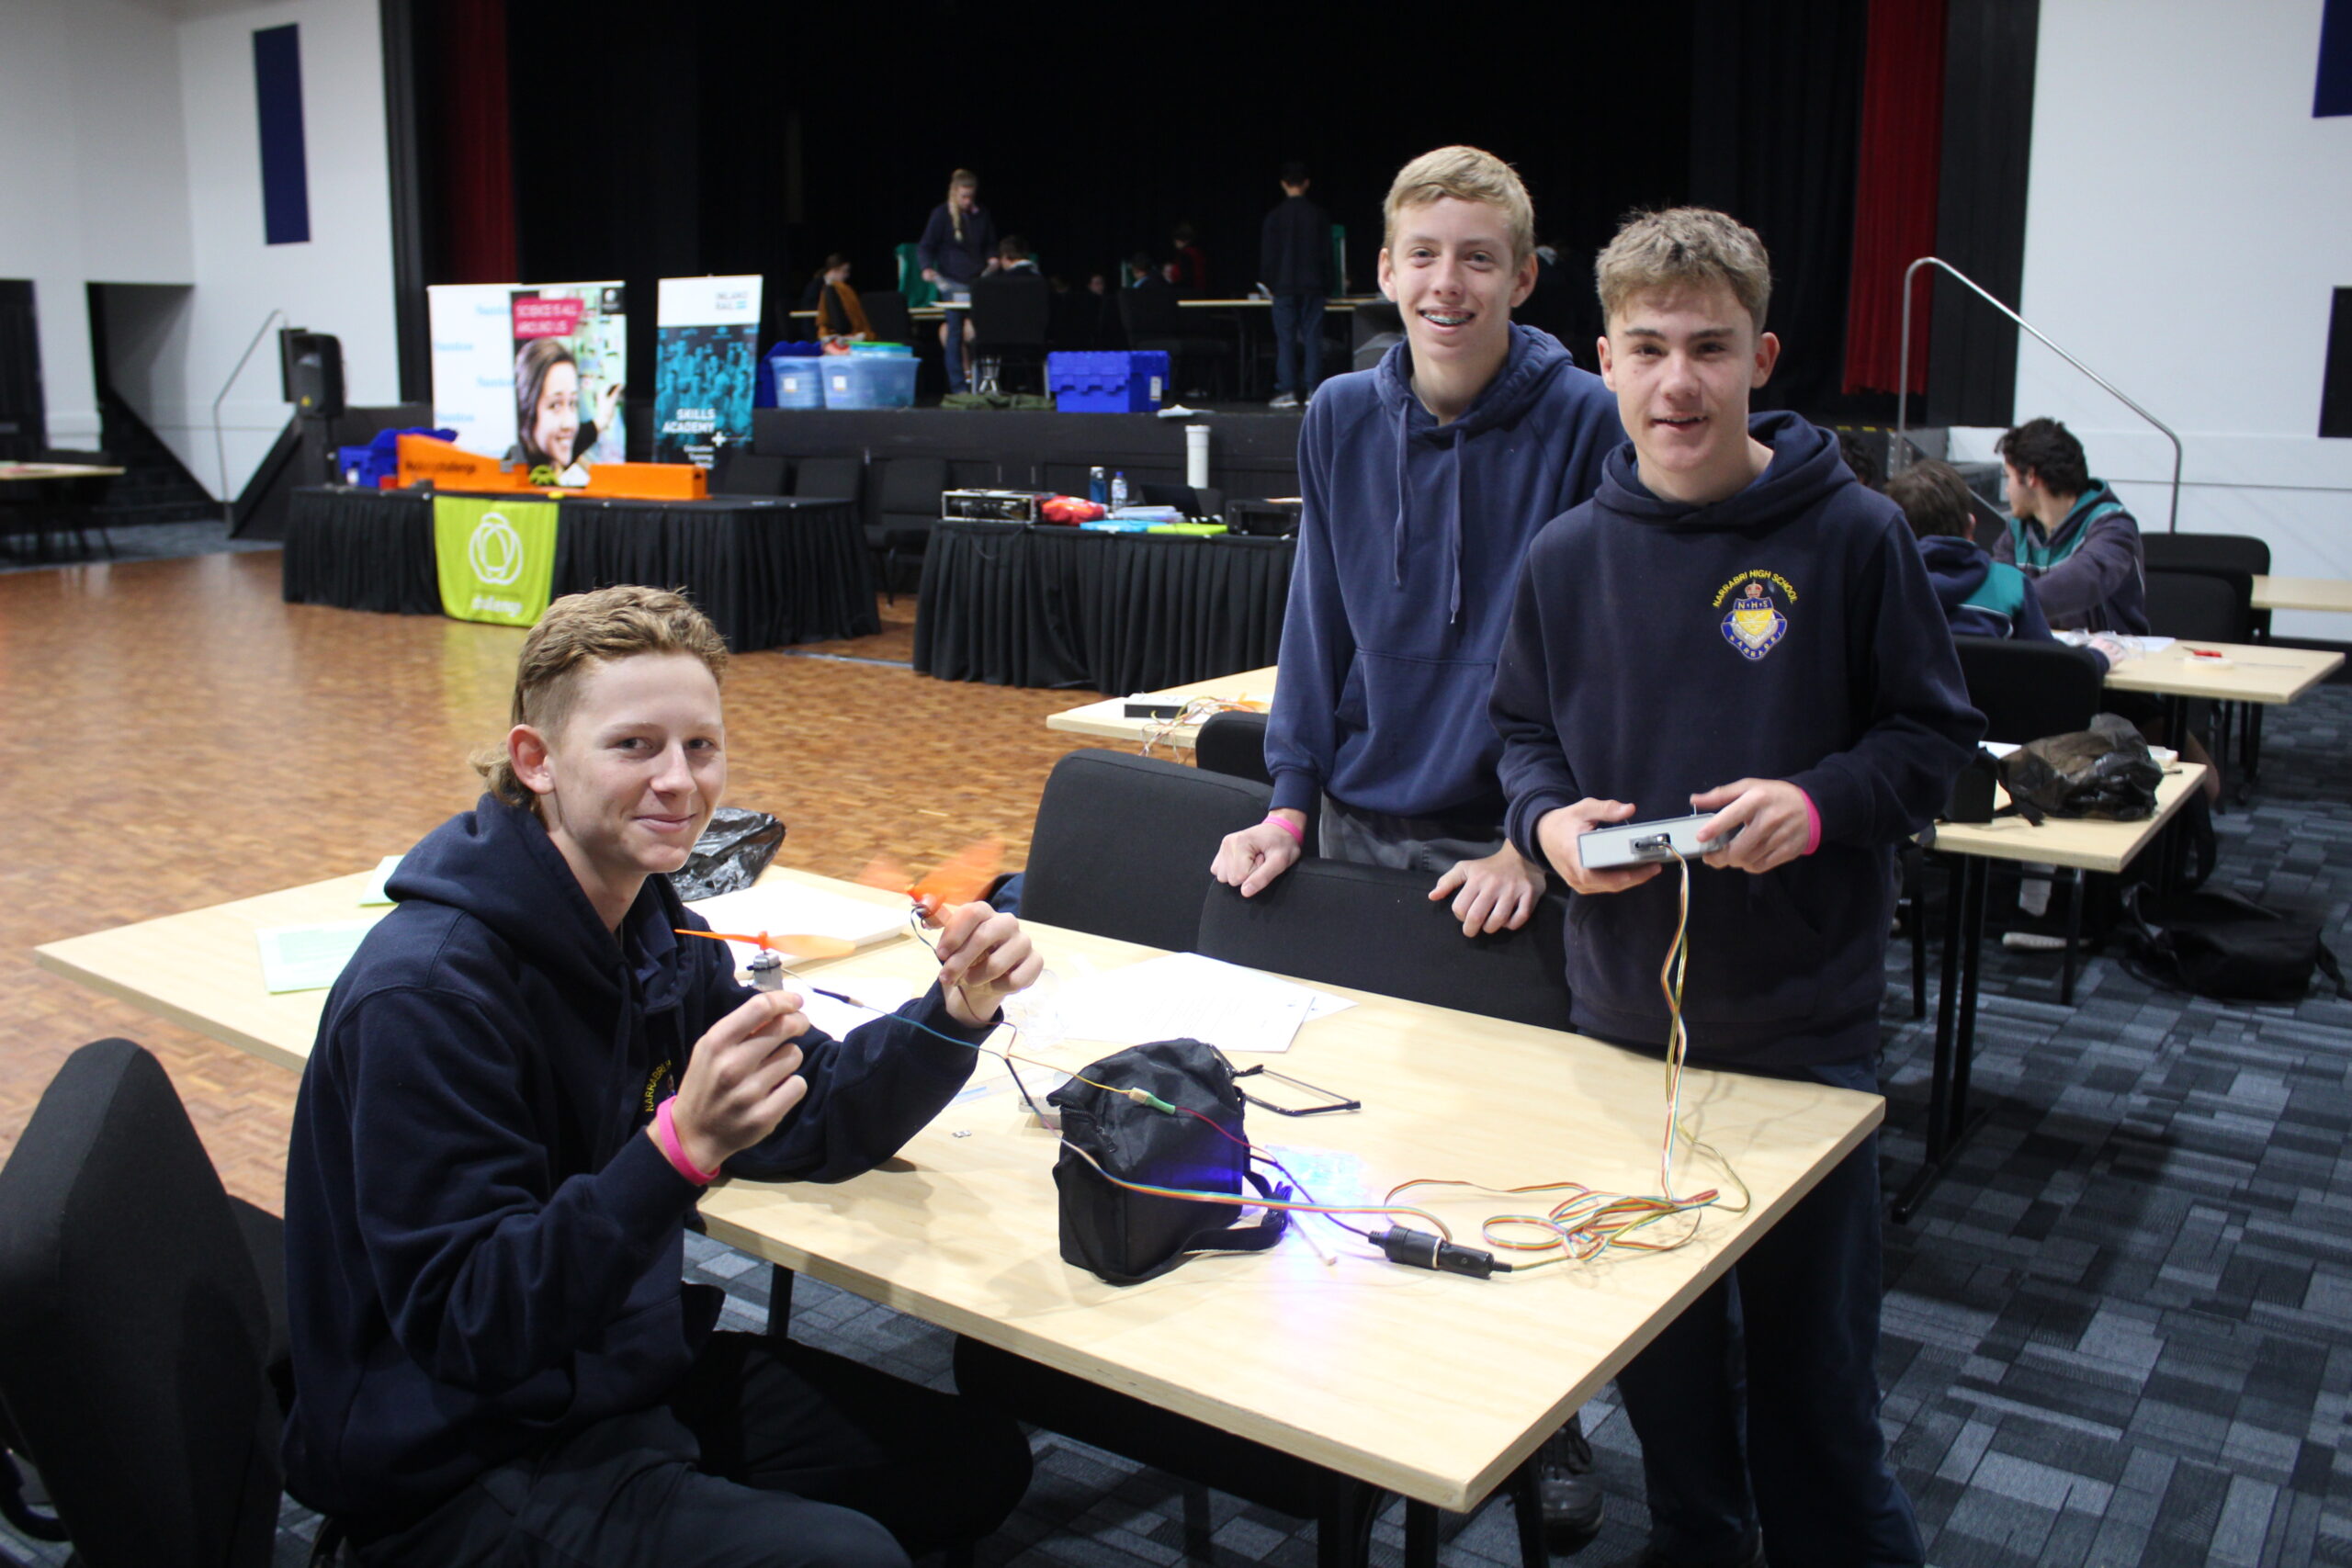 Another great Rotary Science and Engineering Challenge | PHOTOS